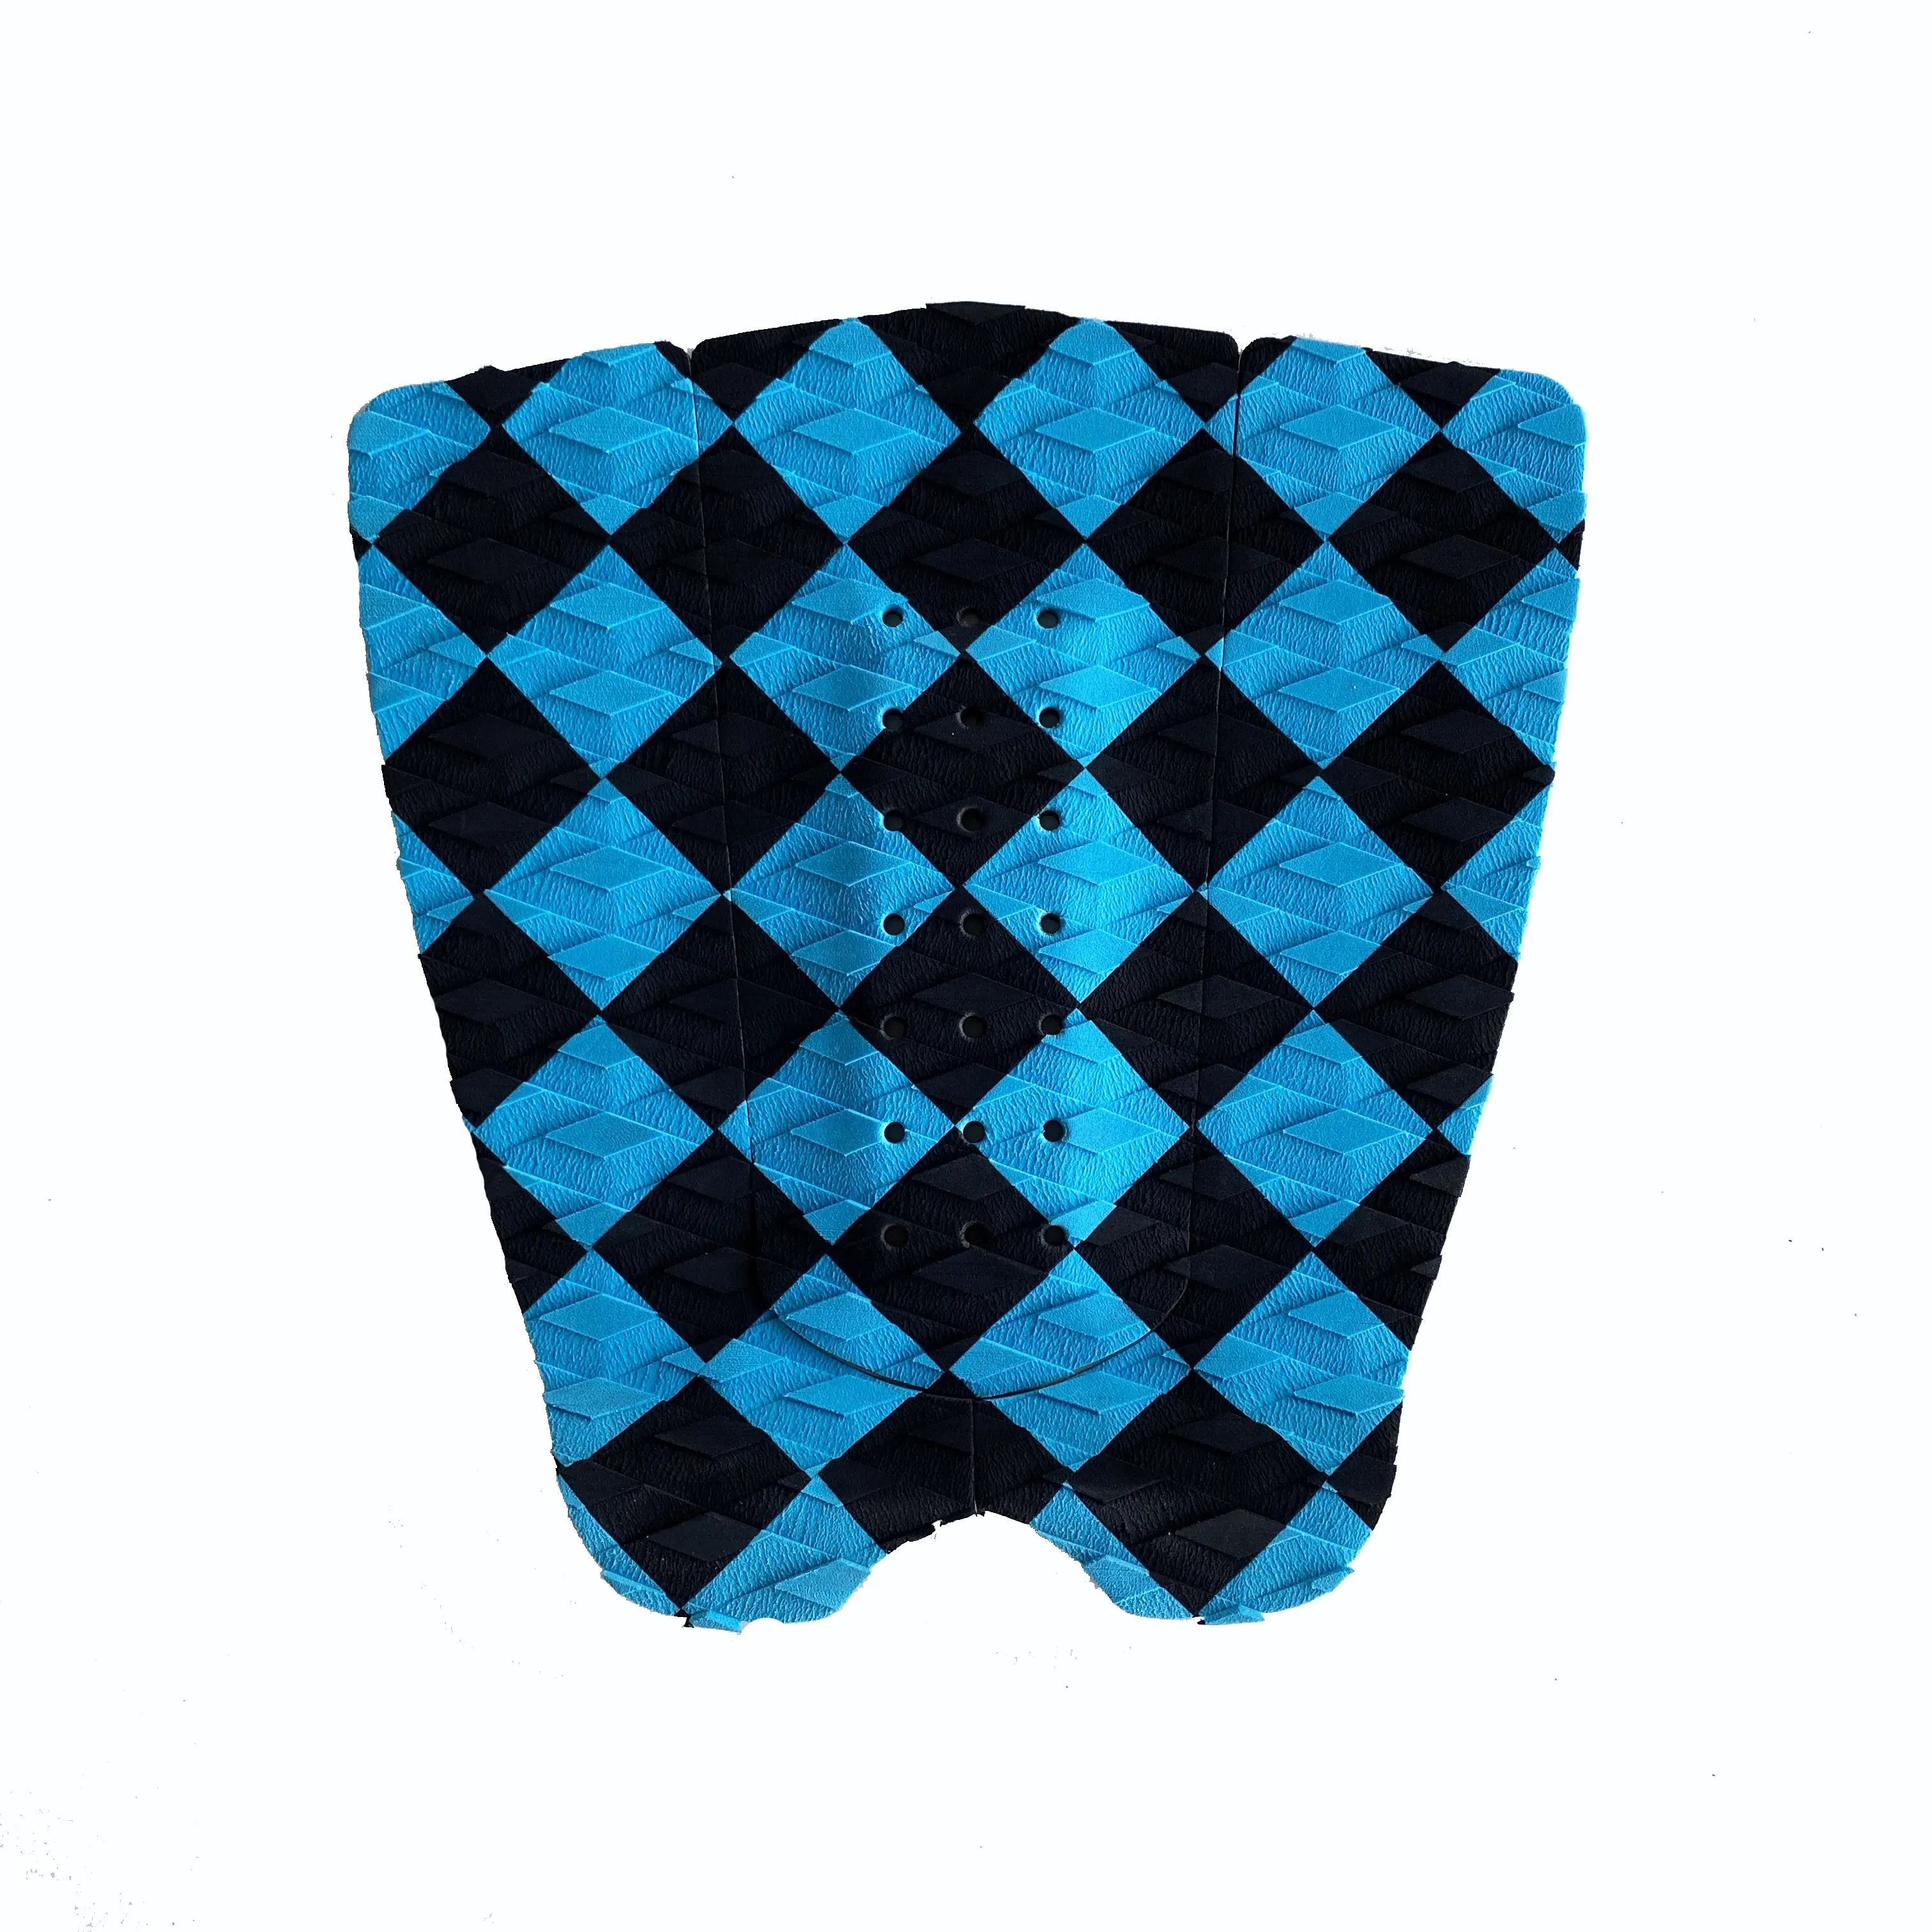 2023 Custom New Design 3 Piece Blue/Black Traction Deck Grip Pad Pro Surf Traction Pad on Sale